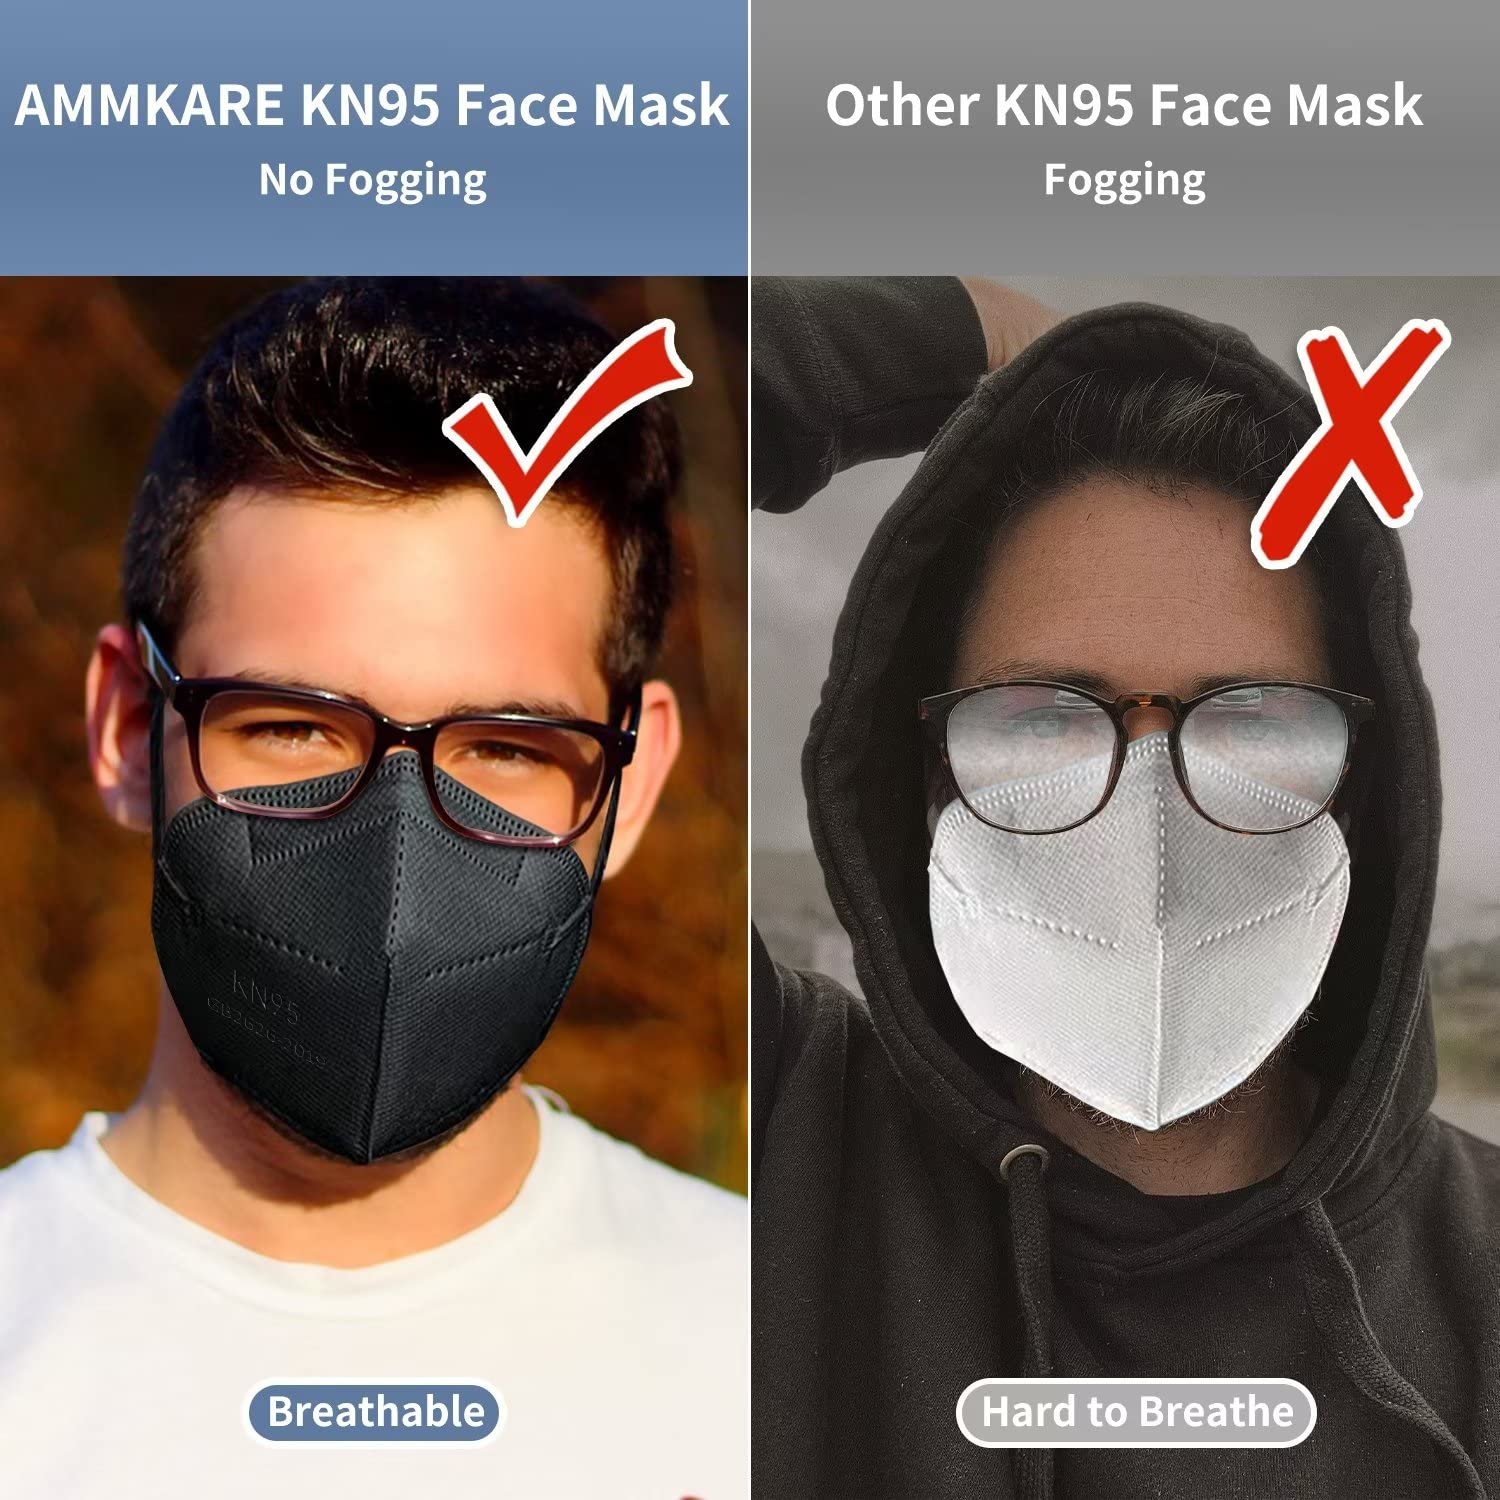 KN95 Face Masks 50 PCS for Adults 5-Ply Breathable and Comfortable Filter Safety Mask with Elastic Ear Loops and Nose Bridge Clip for Women Men Multi-pattern